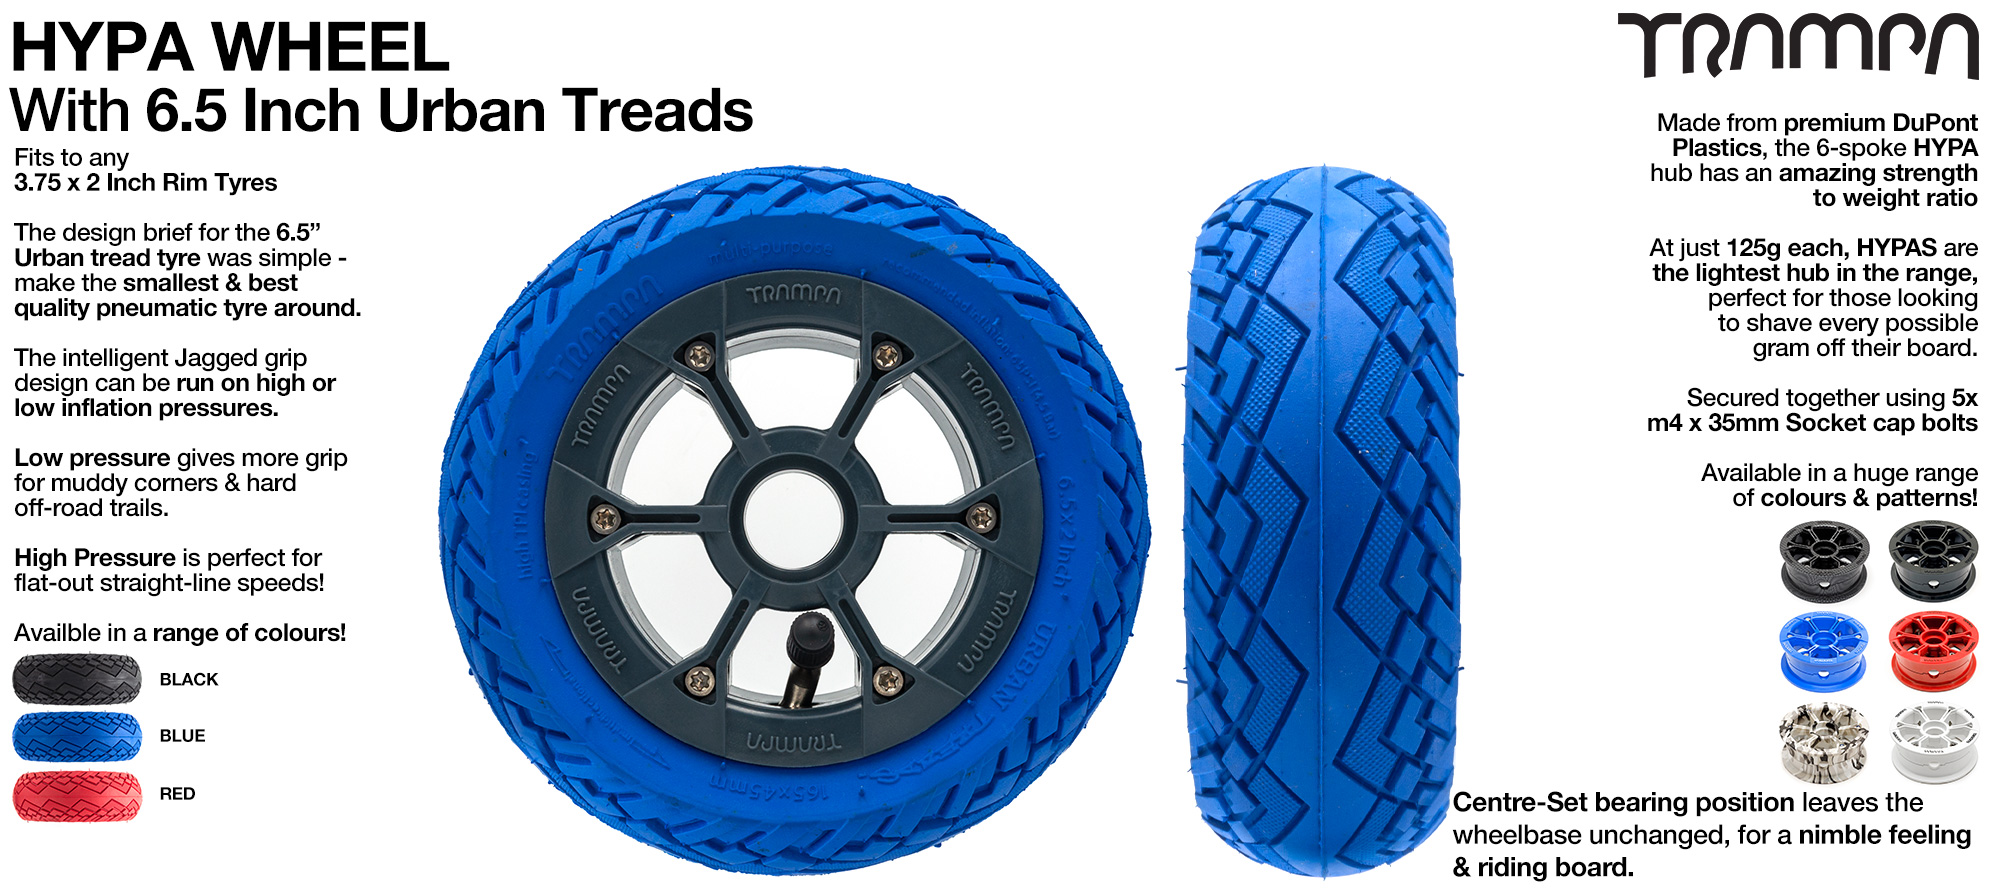 HYPA WHEELS Showing with 6 Inch URBAN TREADS